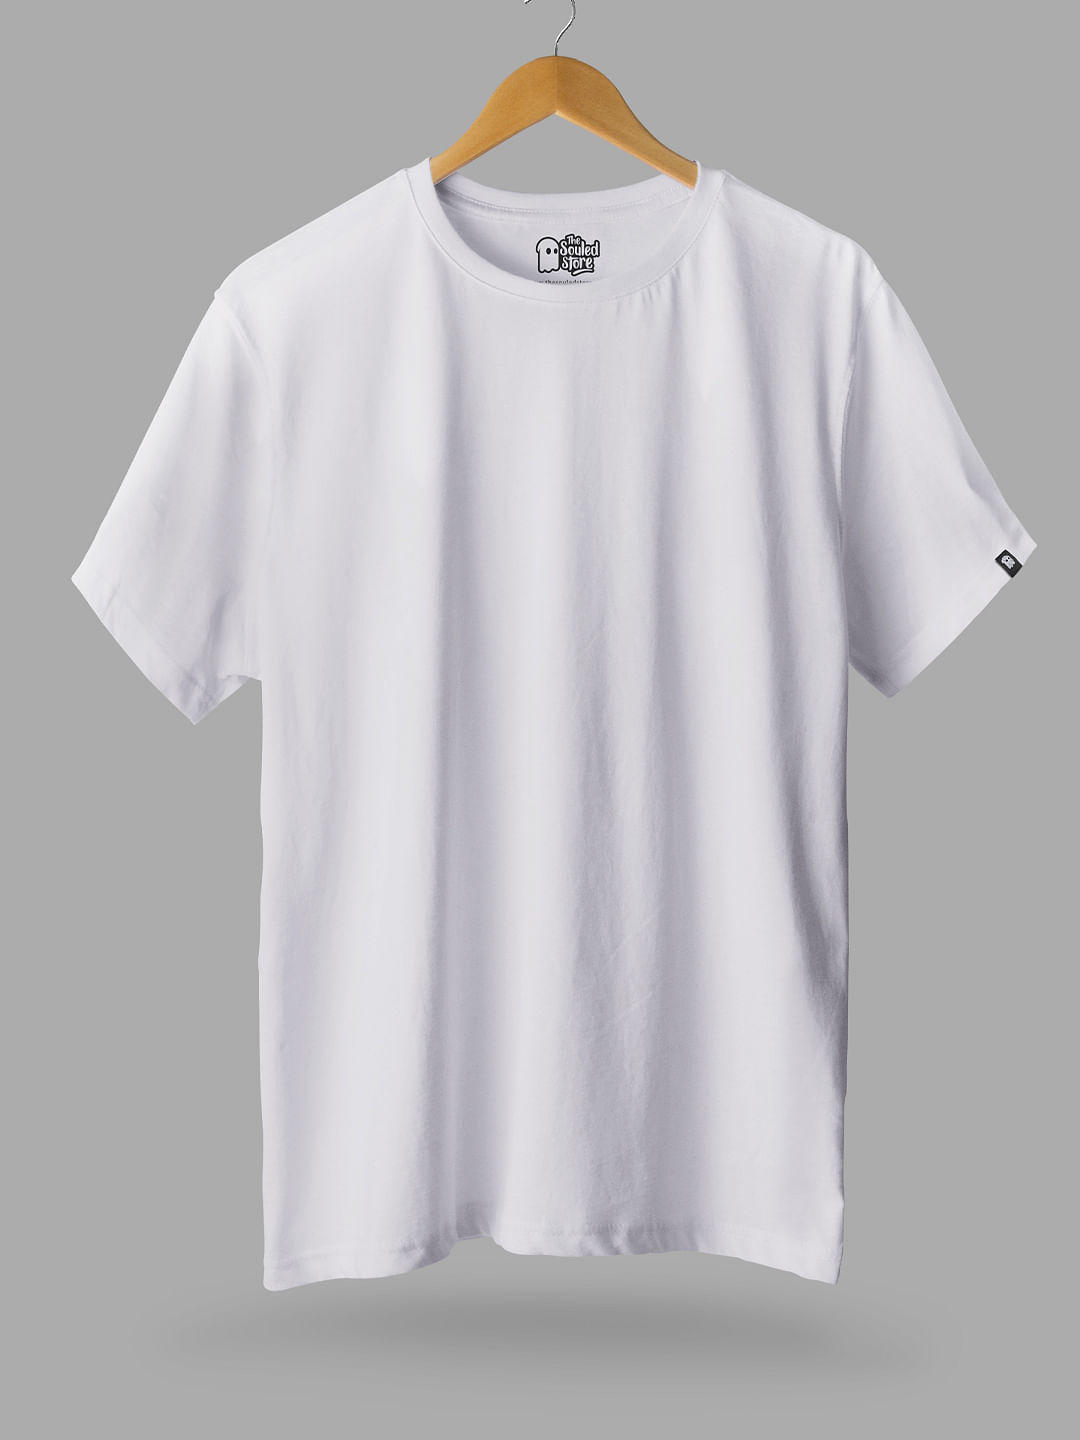 Buy Solids White T Shirts Unisex T Shirts Online At The Souled Store